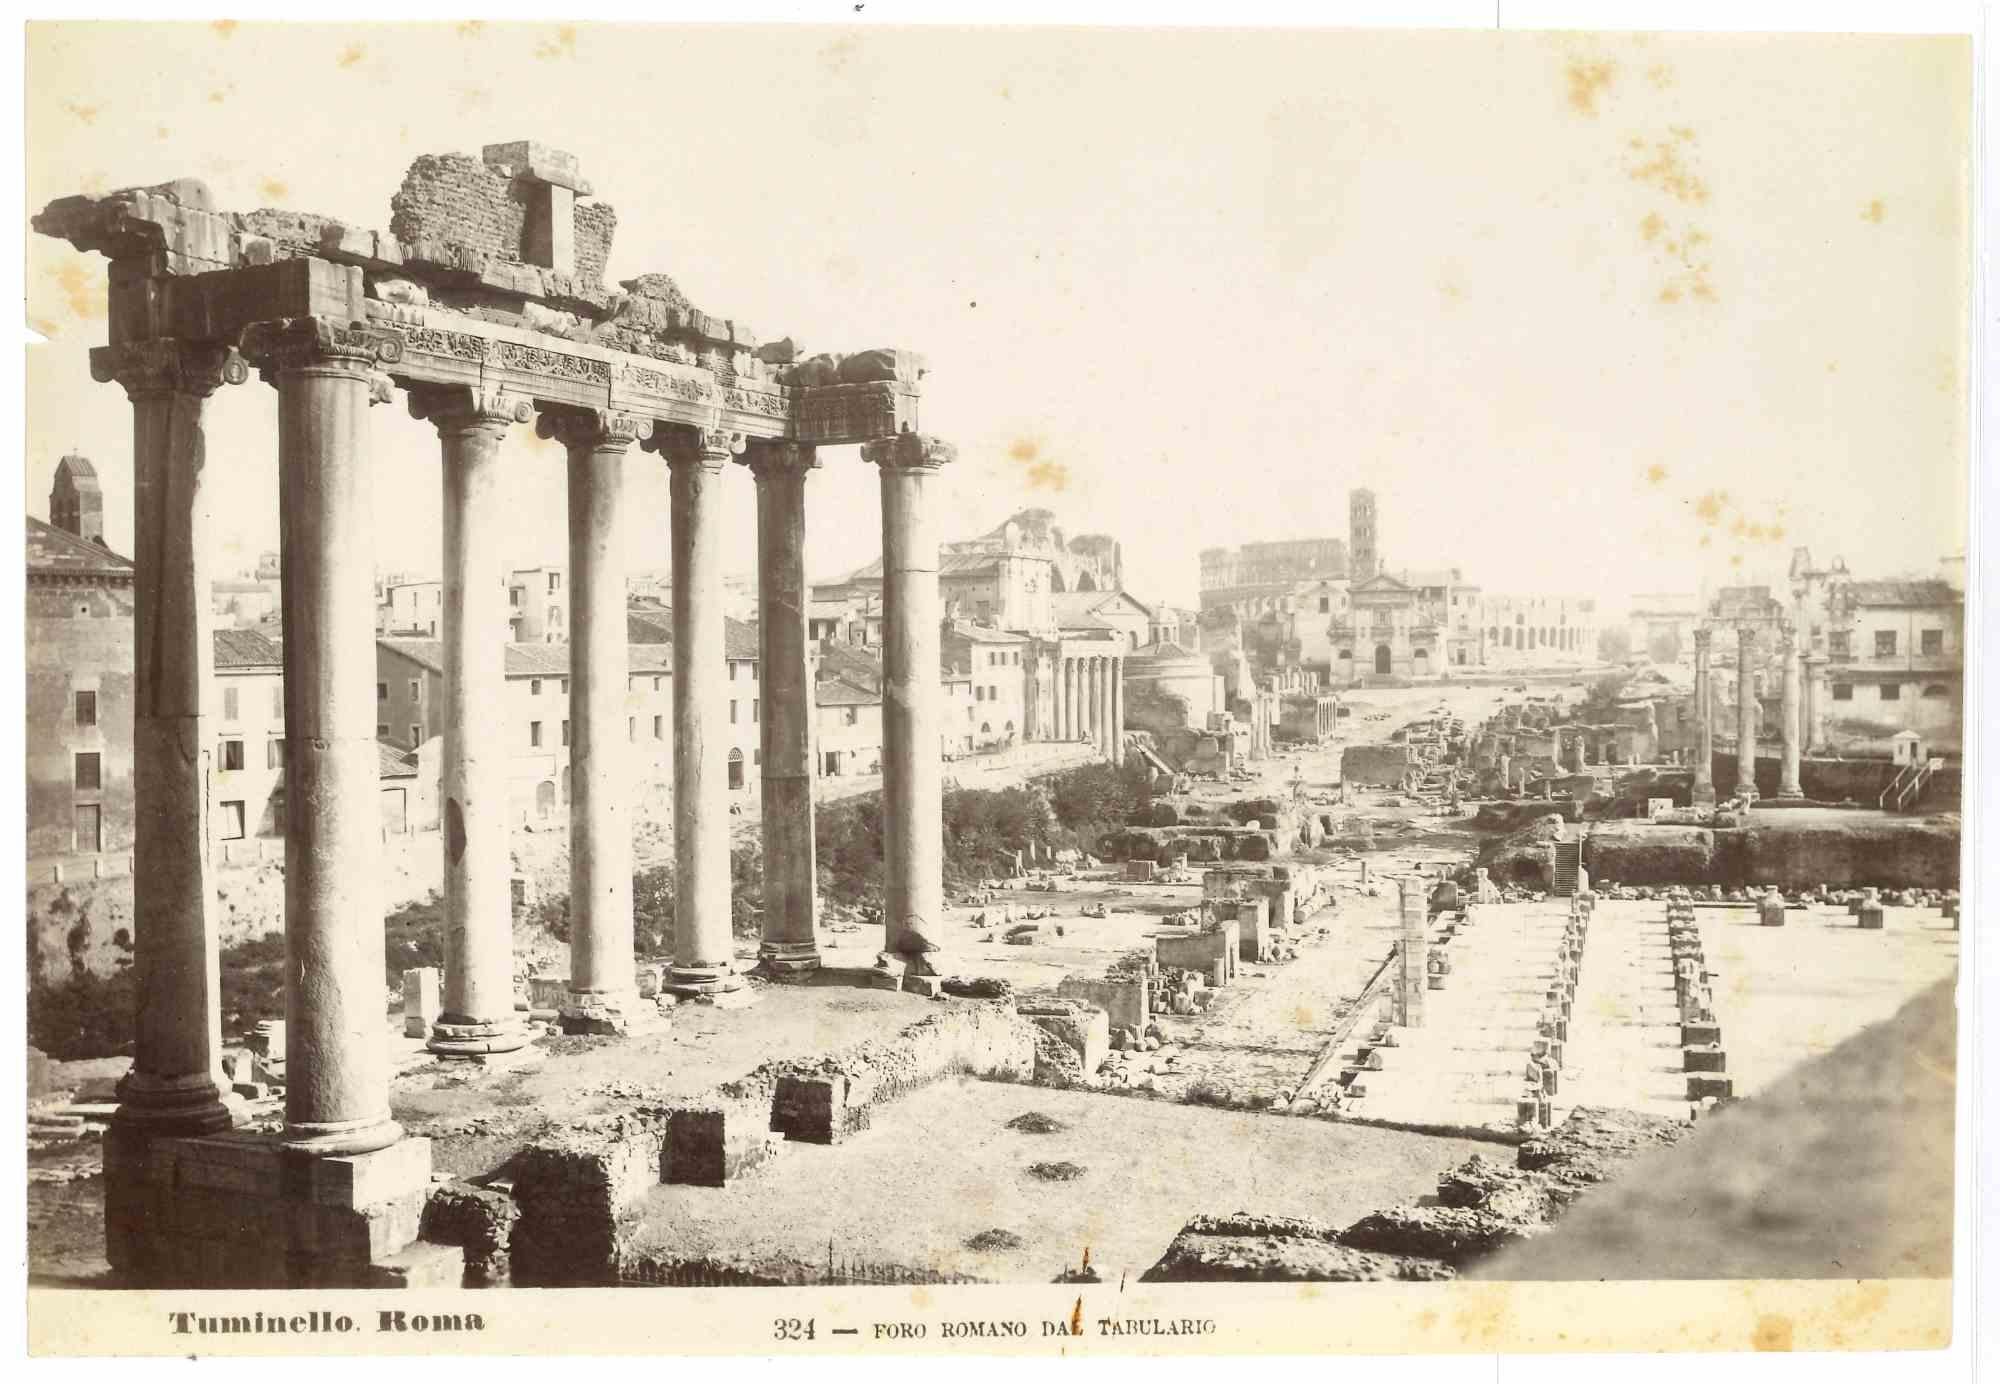 Roman Forum is a vintage print in salt silver realized by Ludovico Tuminello in the early 20th Century.

Titled on the lower.

Good conditions except for some foxing.